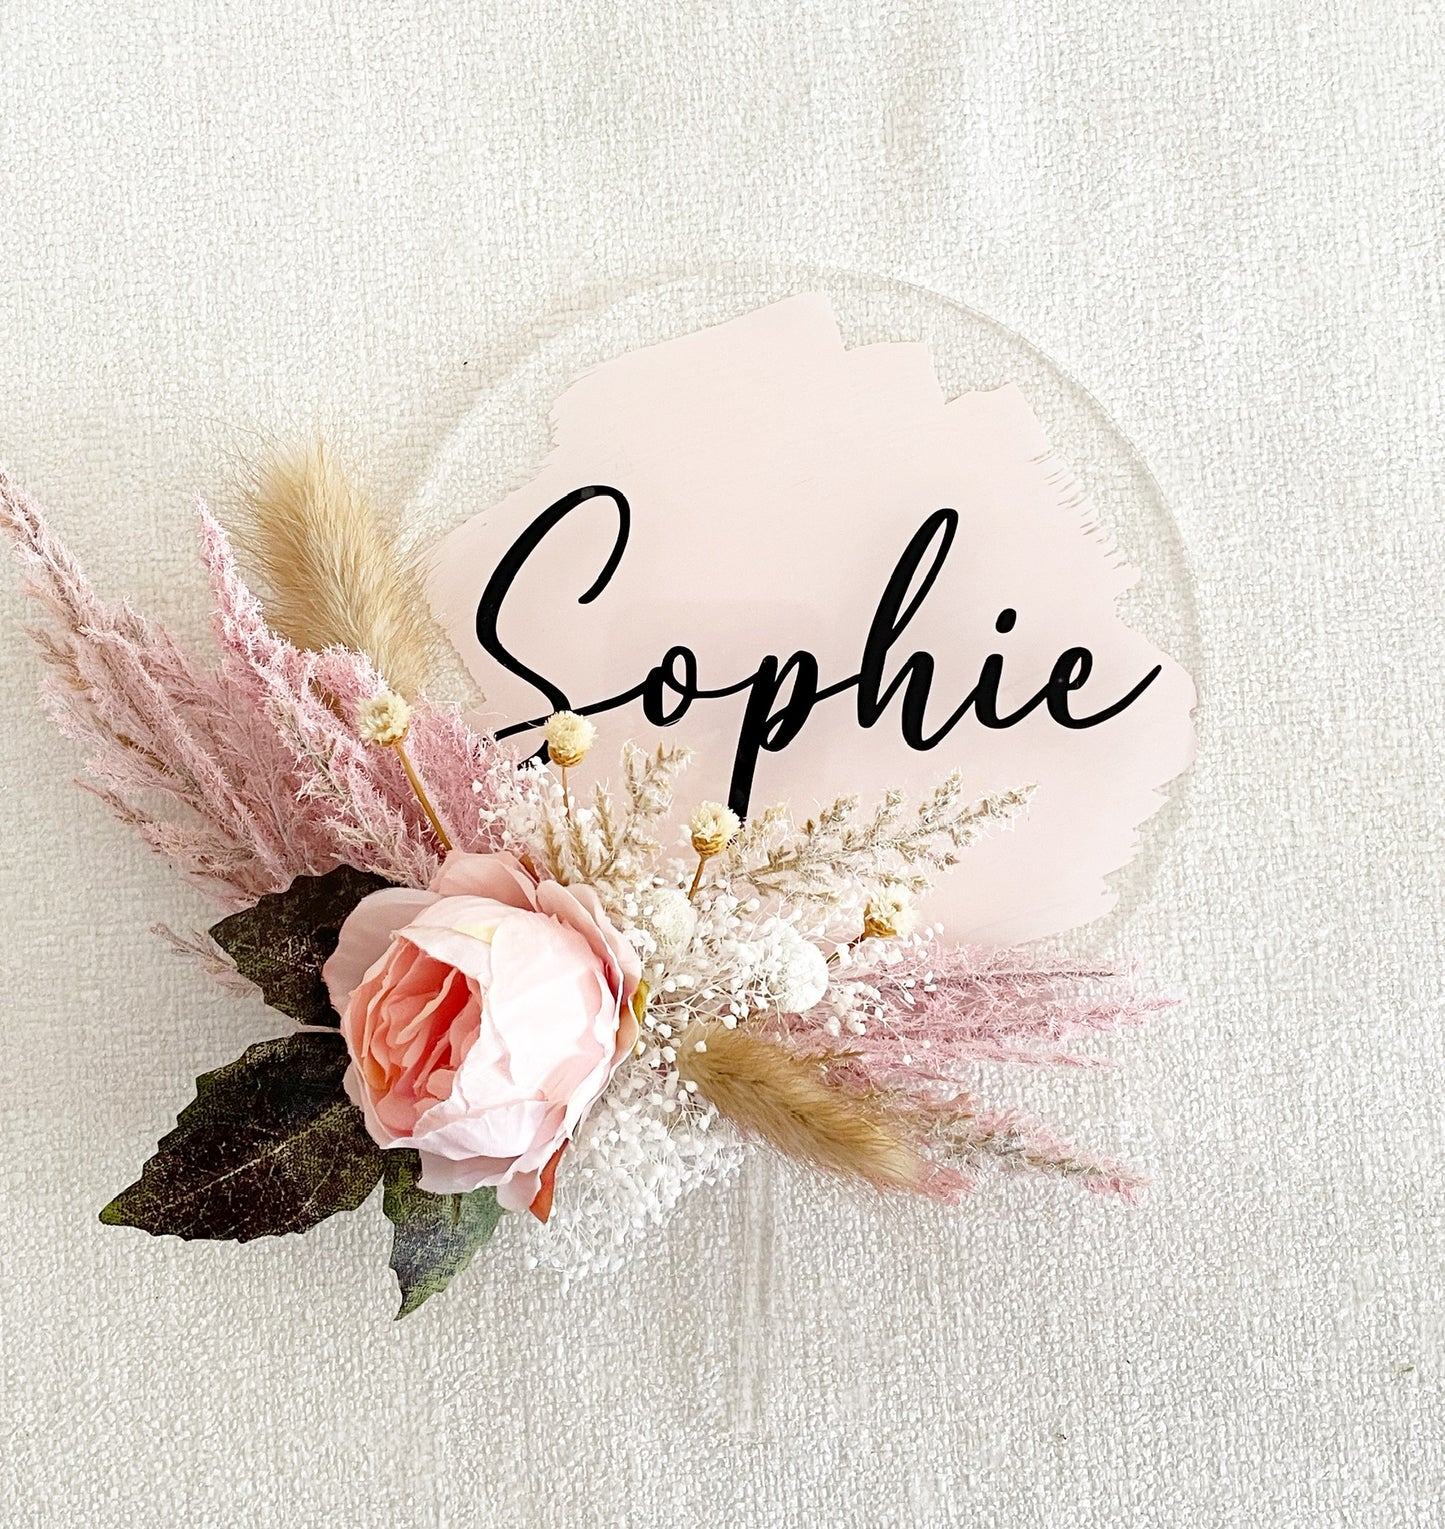 Baby Shower Personalized Acrylic Cake Topper with Dried Flowers, Clear Acrylic / Hand Painted